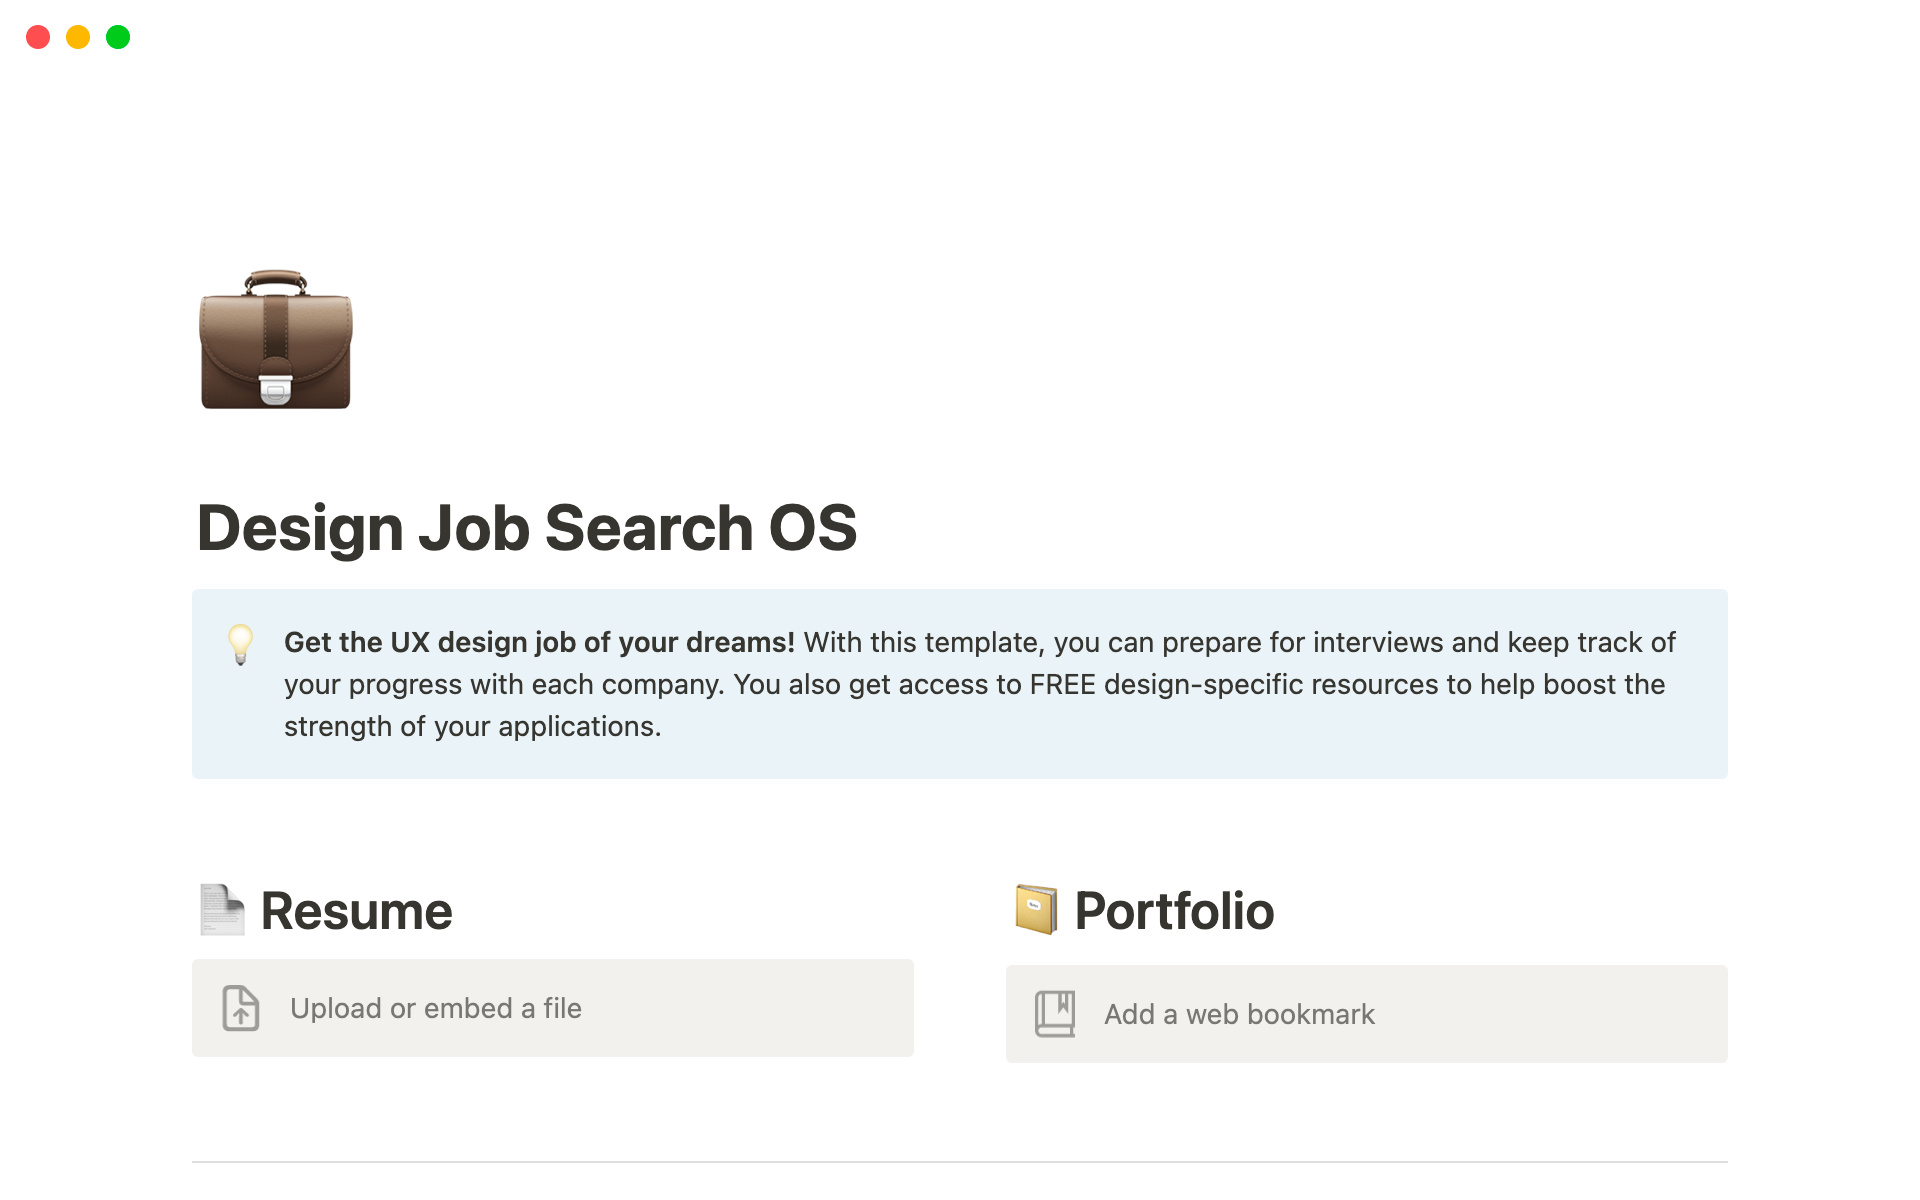 This template helps UX designers manage each step of their job search process.